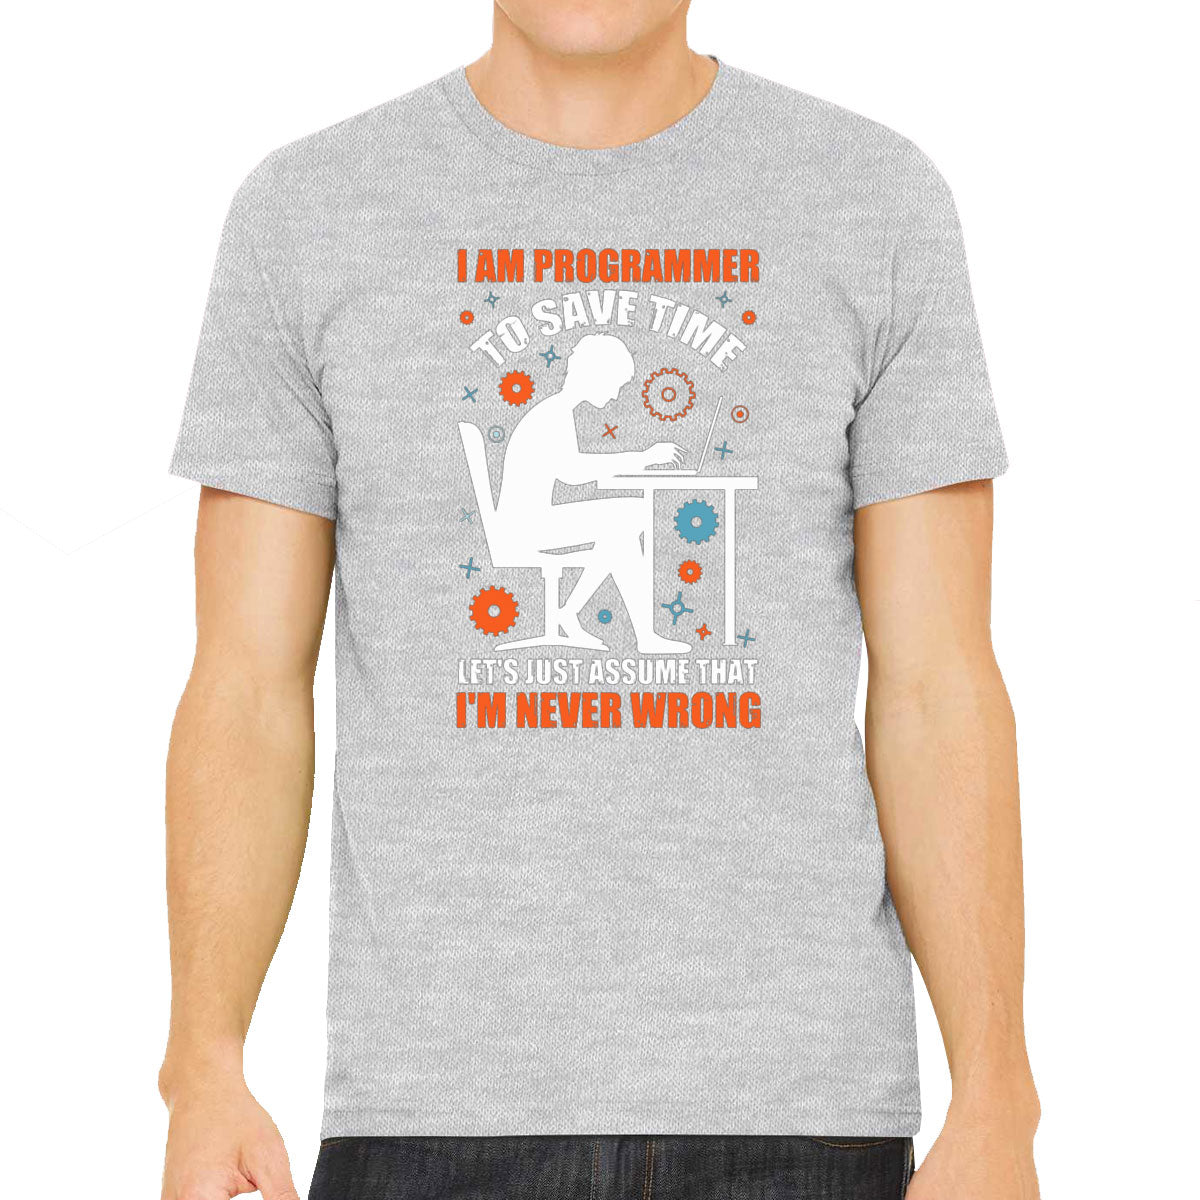 I Am A Programmer To Save Time Men's T-shirt